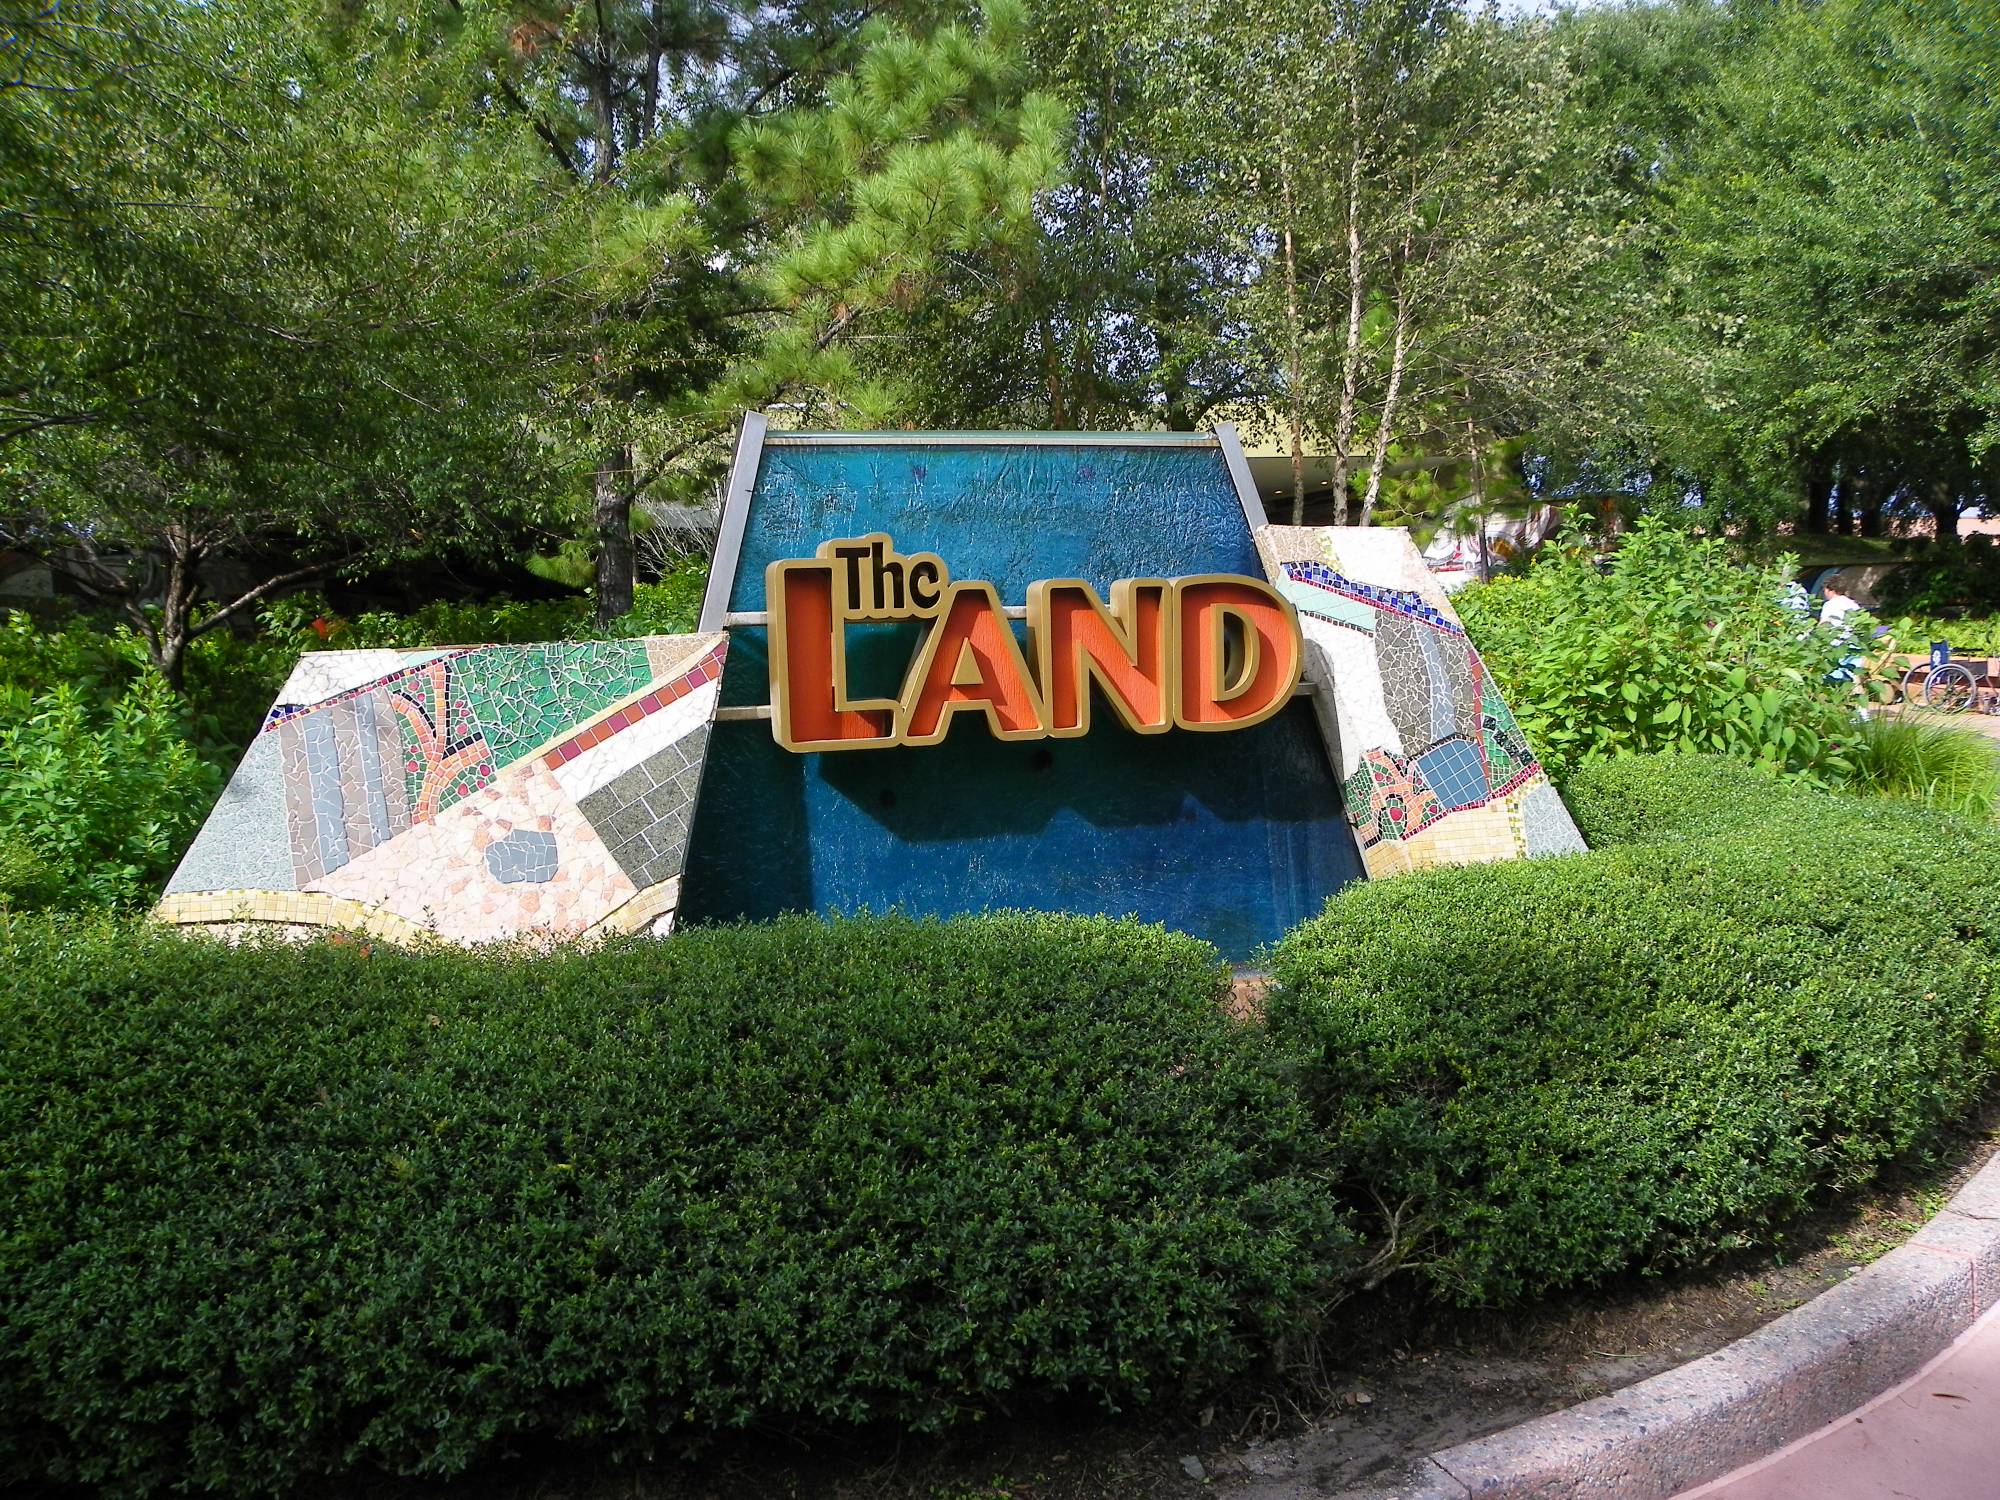 Approach To The Land And Soarin'